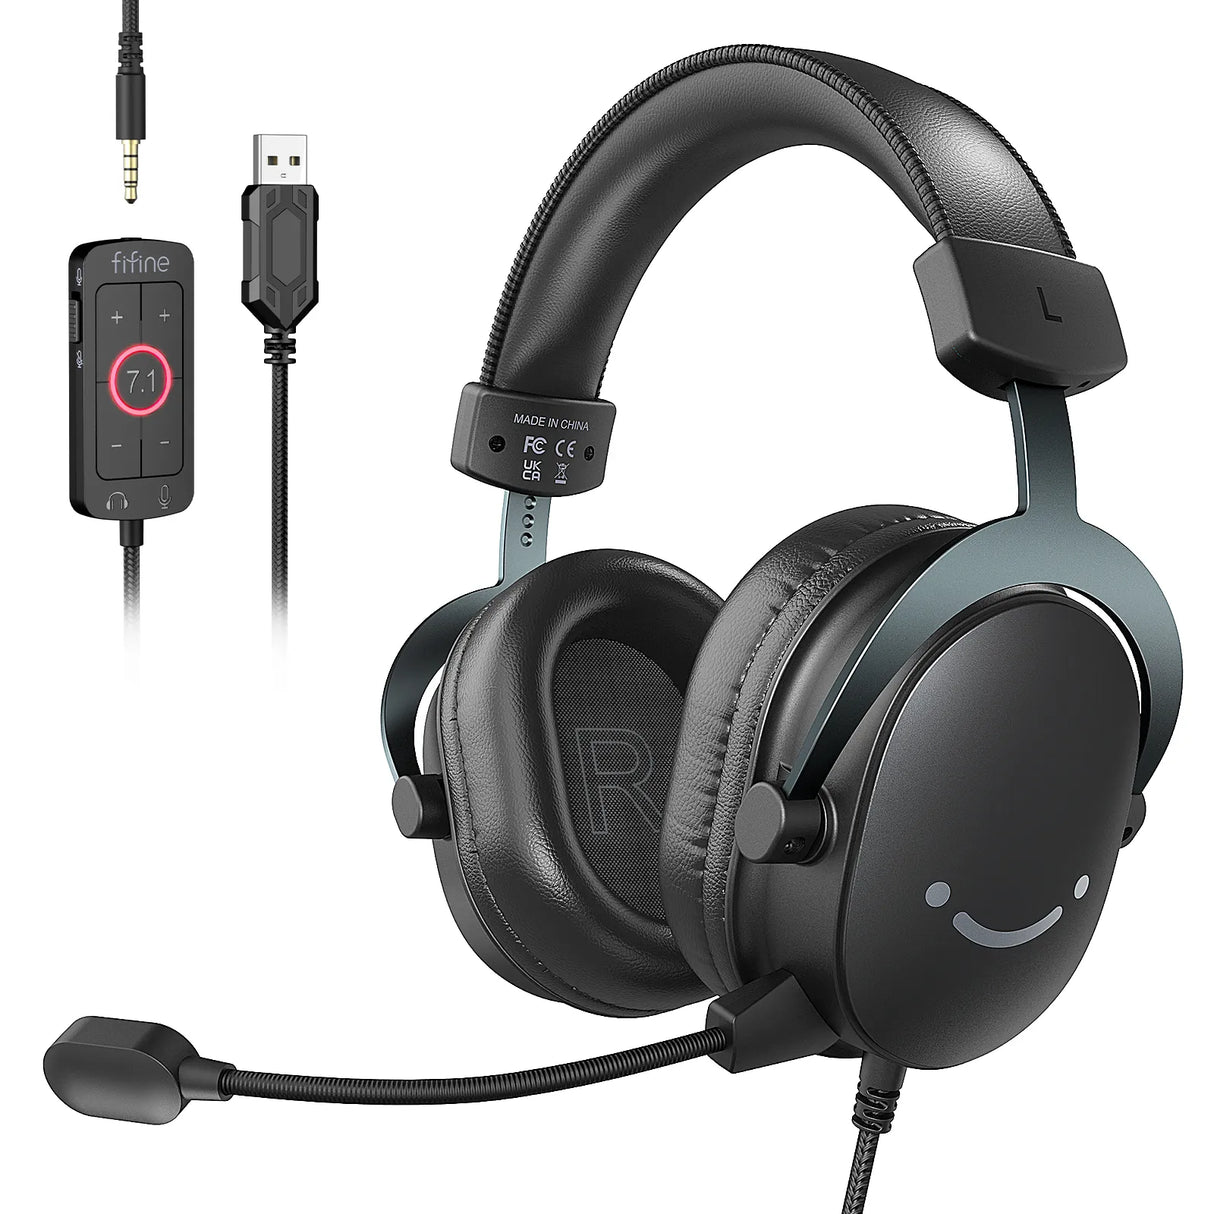 Headset Gamer FIFINE AmpliGame com Microfone - H9